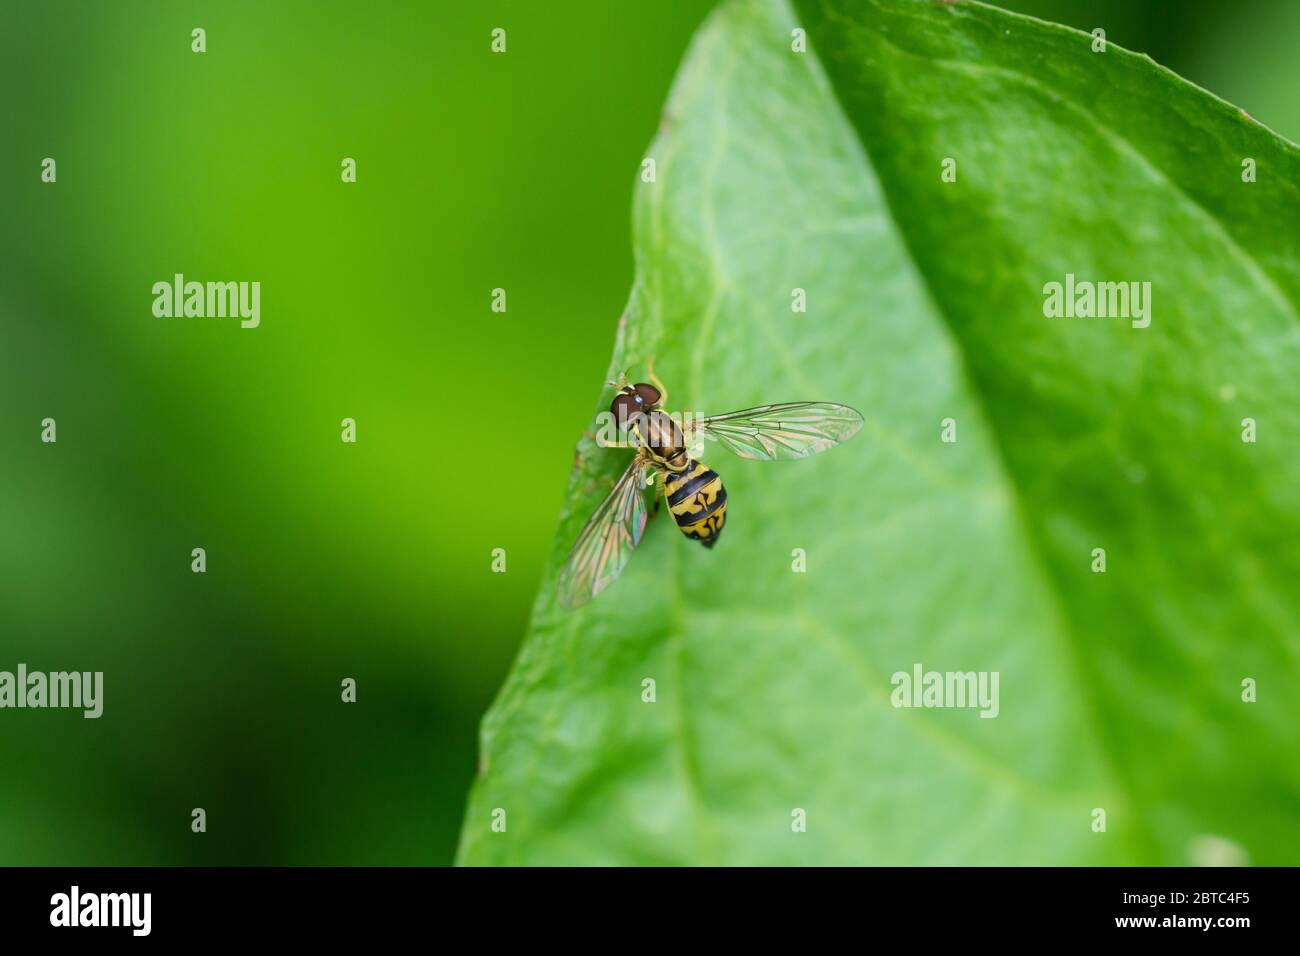 Eastern Calligrapher Fly on Leaf Stock Photo